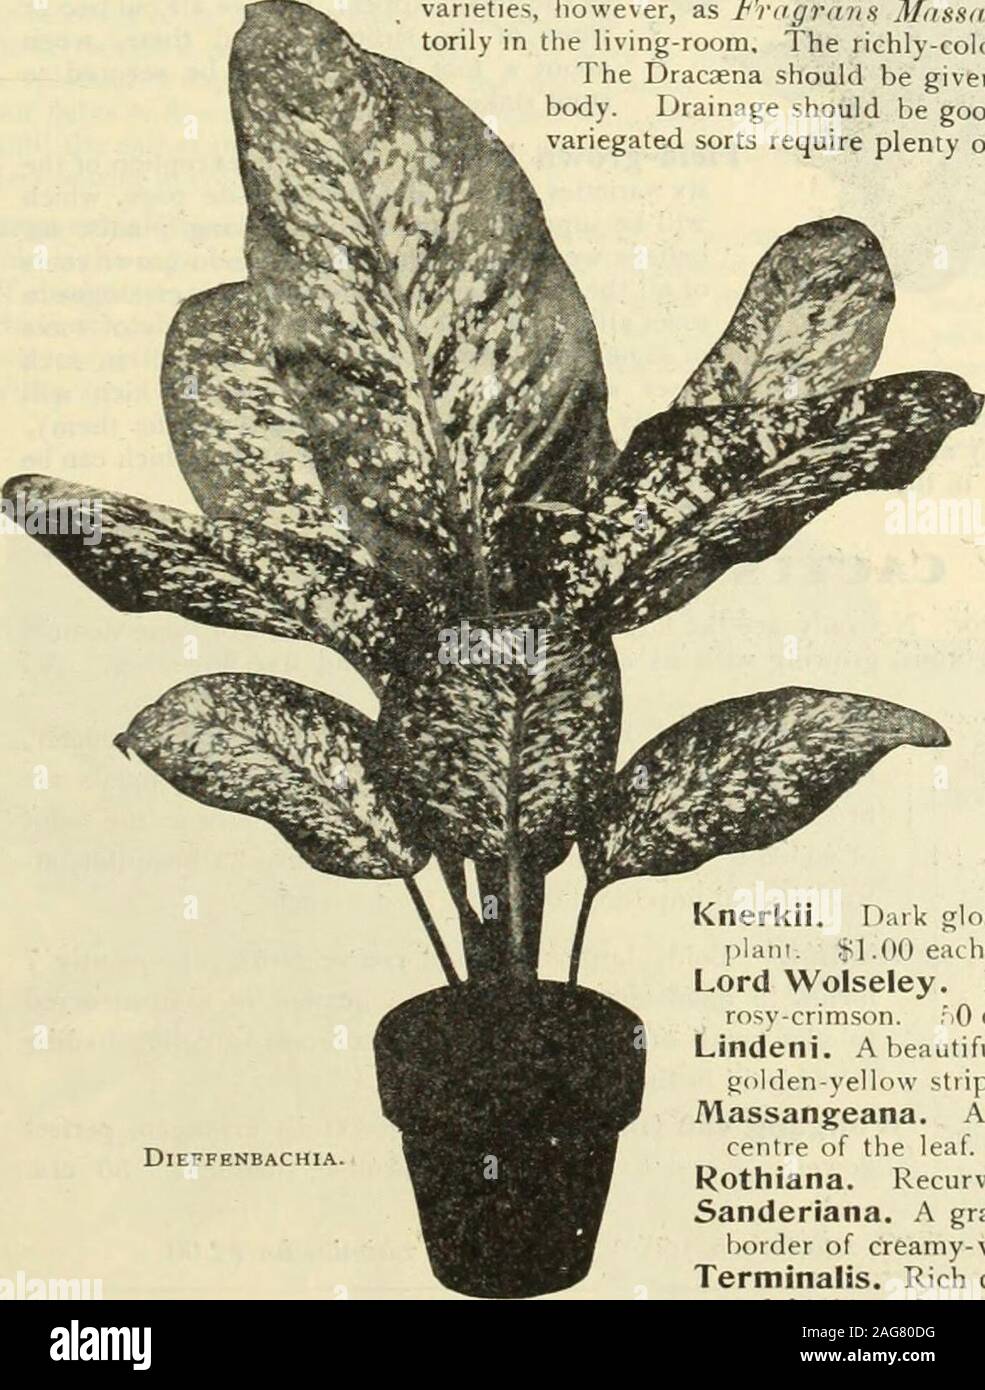 . Dreer's 1913 garden book. plants. $1.50 each.Indivisa. This variety is used very extensively as a cenireplant for vases, porch and window boxes, etc. It standsfull exposure to the sun, and its long, narrow, gracefulfoliage contrasts beautifully with other plants. 25 cts., 50cts. and $1.00 each.Knerkii. Dark glossy green leaves; makes a bold specimen, and is a good house plant-. $1 .00 eac h.Lord Wolseley. Long, narrow, recurving foliage, which colors to a very bright rosv-crimson. 50 cts. each.Lindeni. A beautiful variegated form of Jfyagraws, with broad green foliage and golden-yellow strip Stock Photo